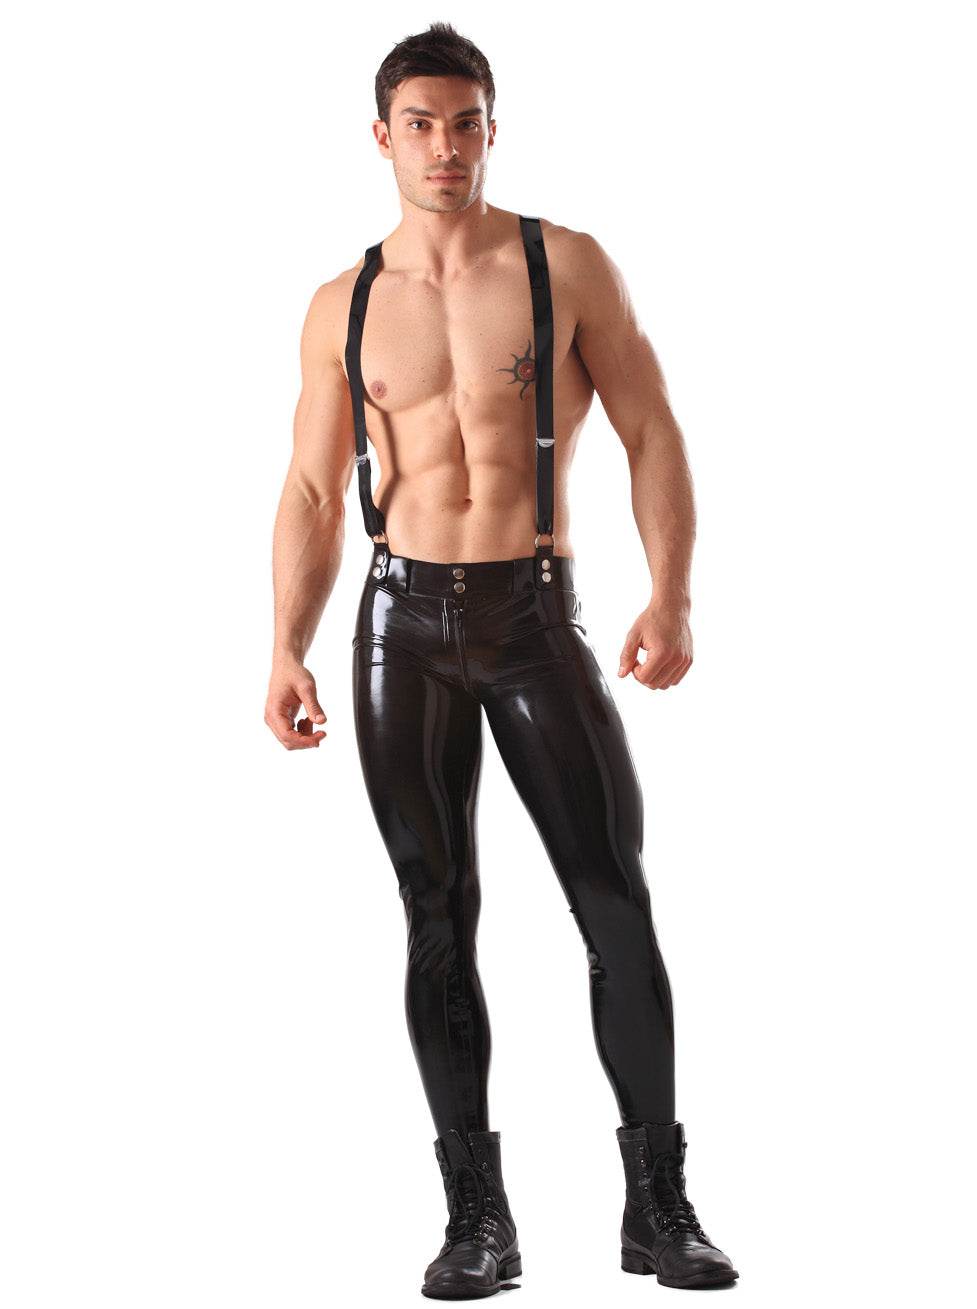 Gunther two colour contrast men's latex leggings with two way back zip.